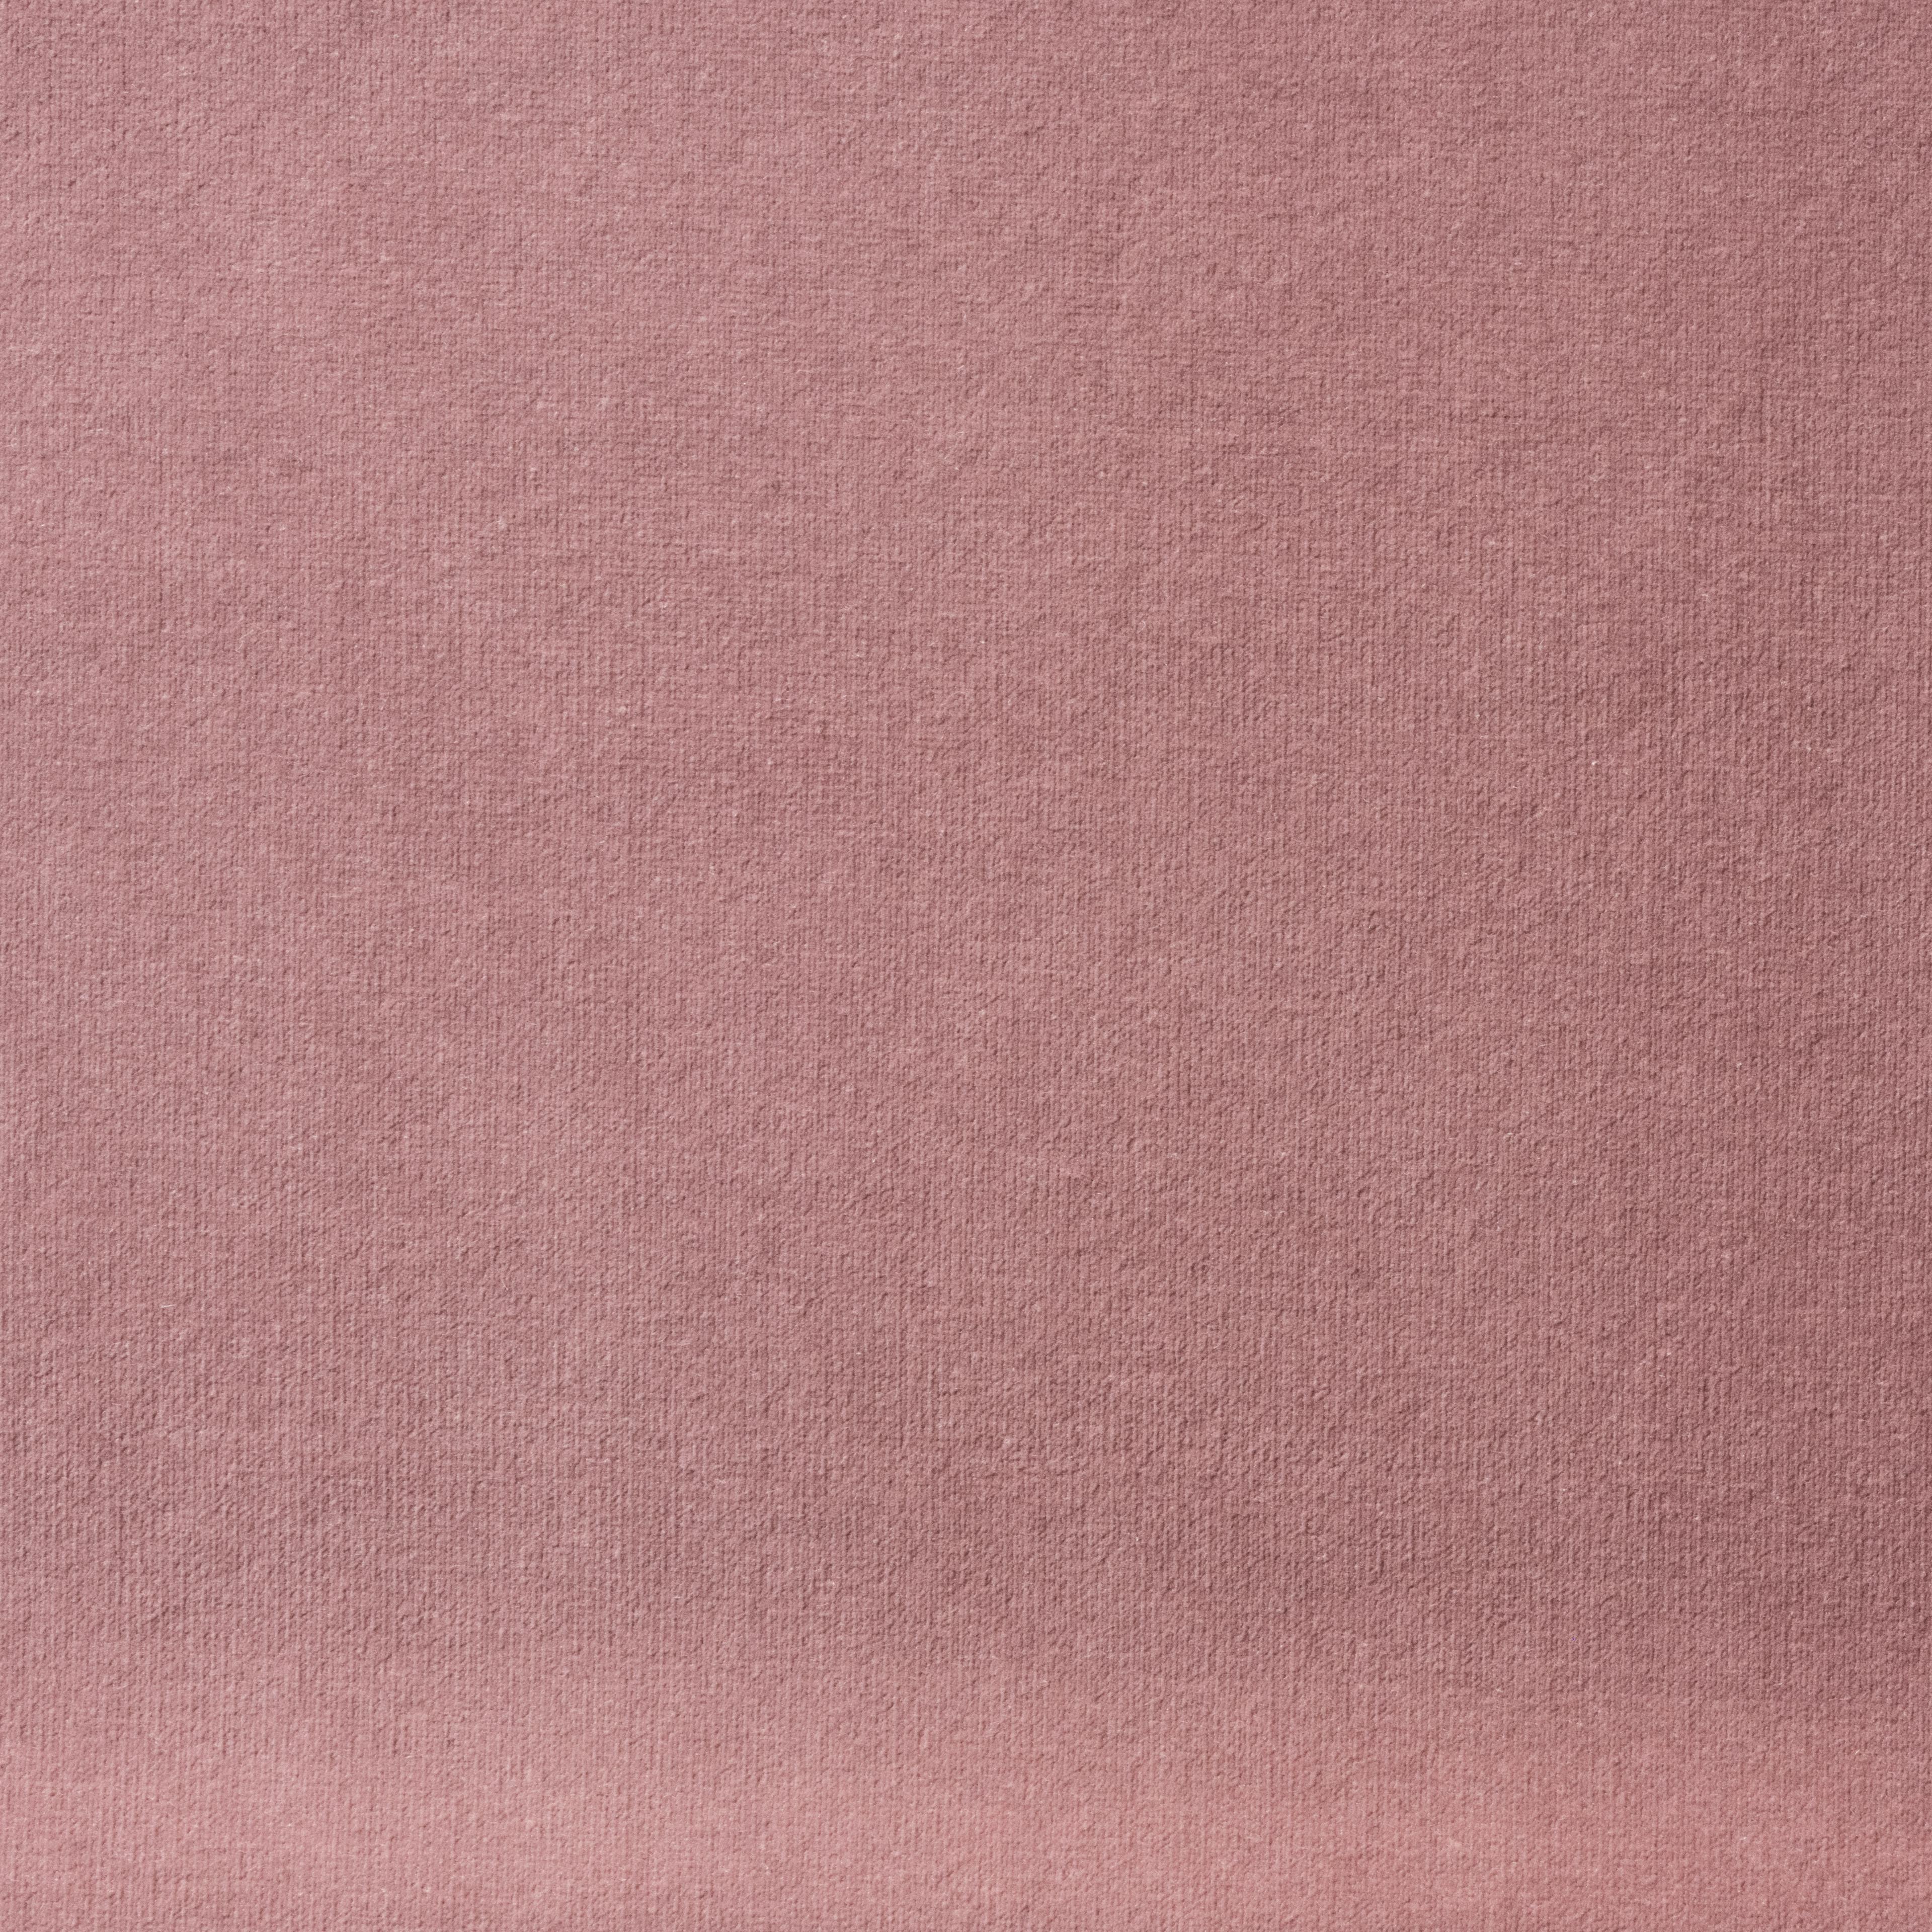 Fiocco Dusty pink 2919